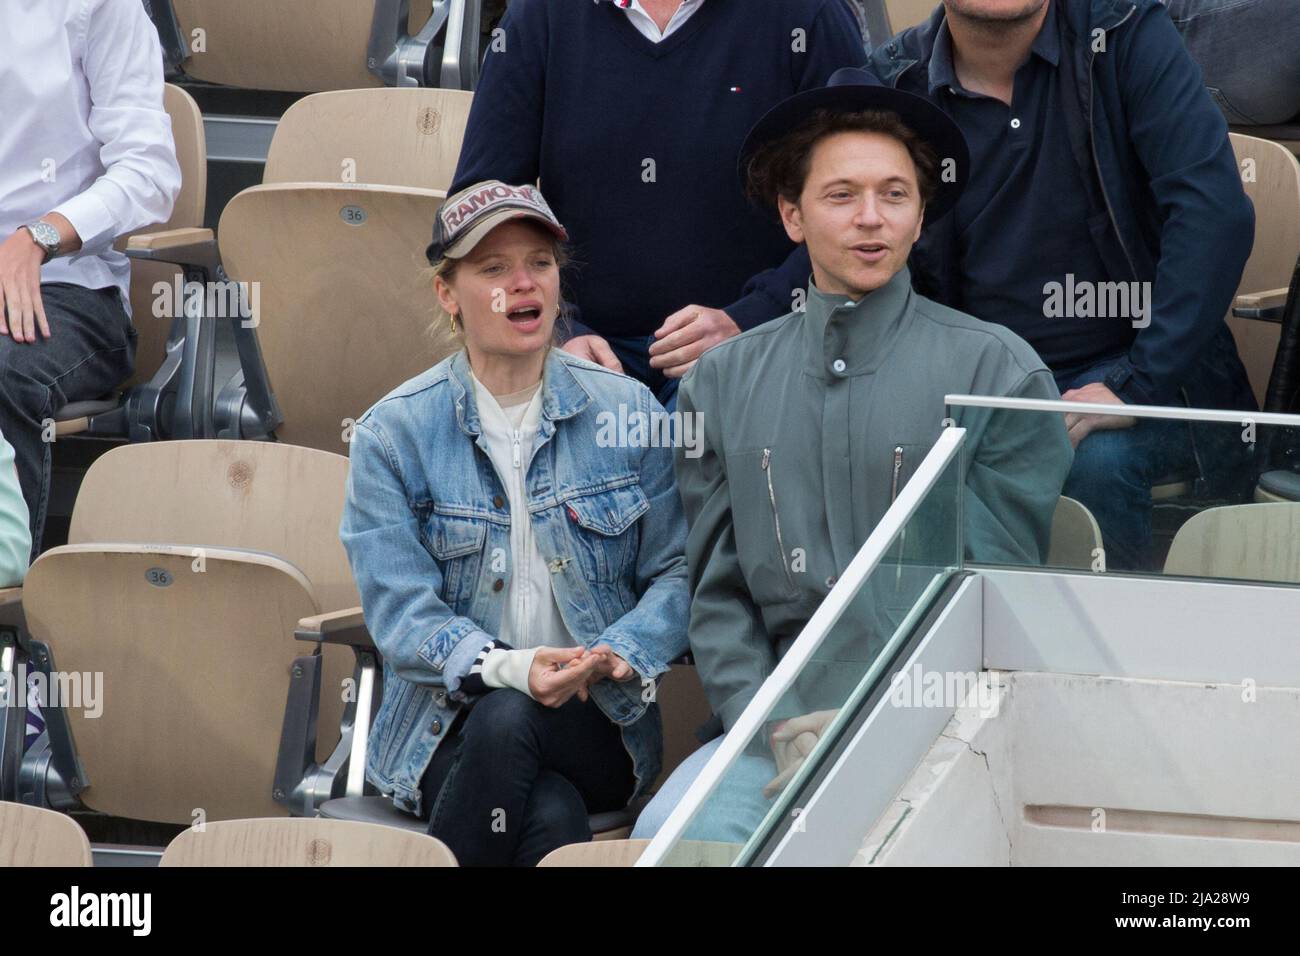 Paris, France. May 26, 2022, Melanie Thierry, Raphael Haroche in the stands during French Open Roland Garros 2022 on May 26, 2022 in Paris, France. Photo by Nasser Berzane/ABACAPRESS.COM Stock Photo